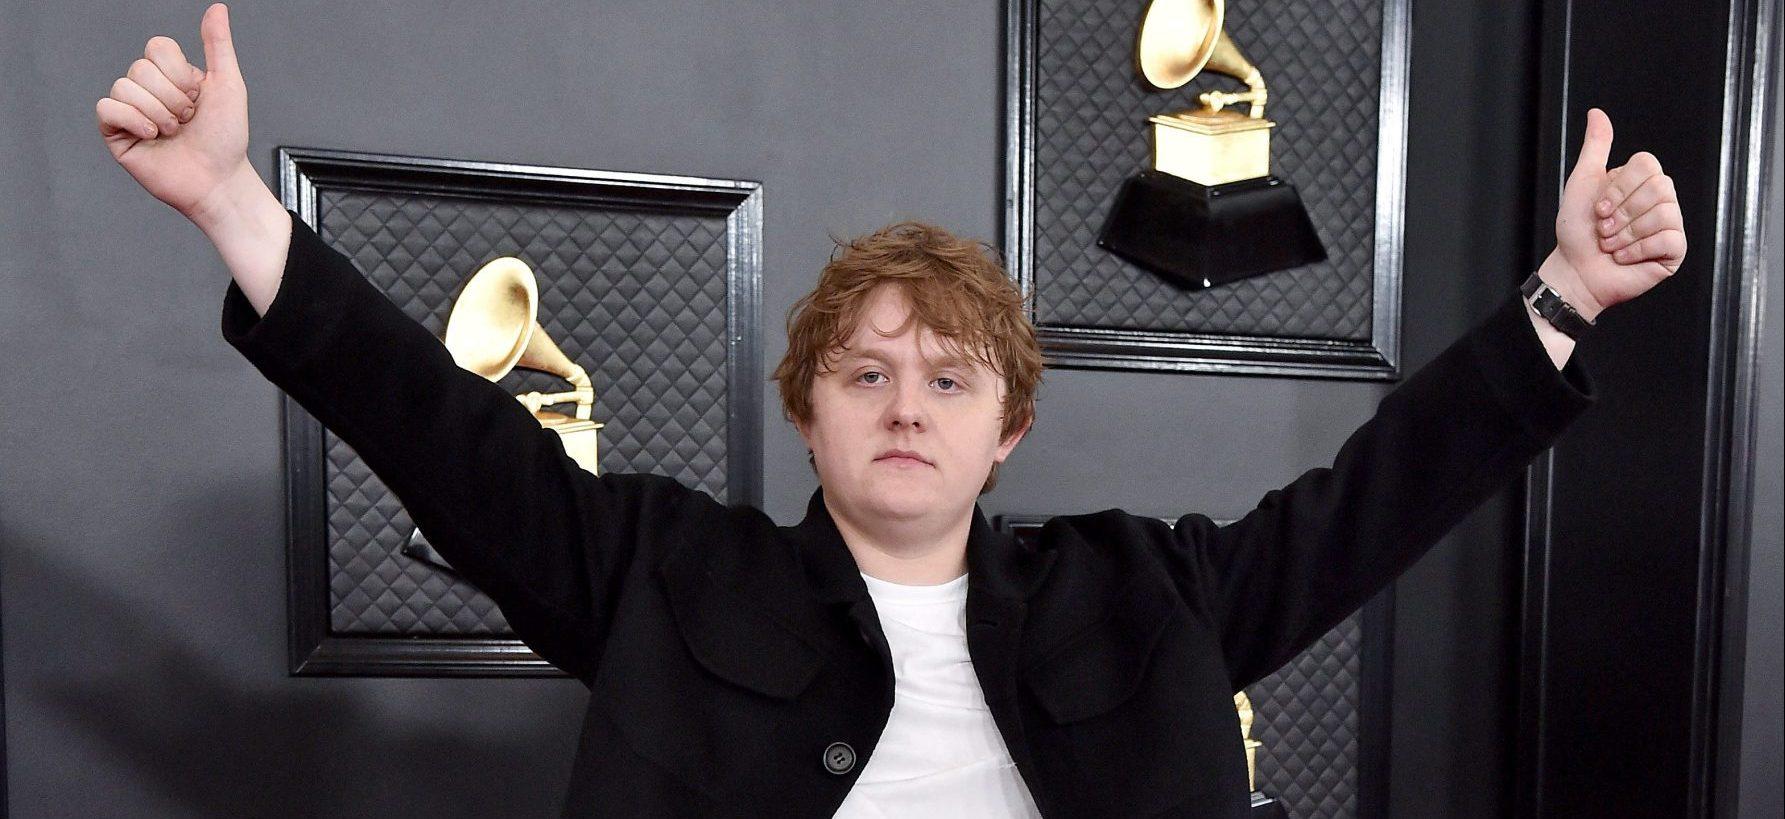 Lewis Capaldi Reveals He Will Quit Music If His Tourette’s Syndrome Gets Any Worse